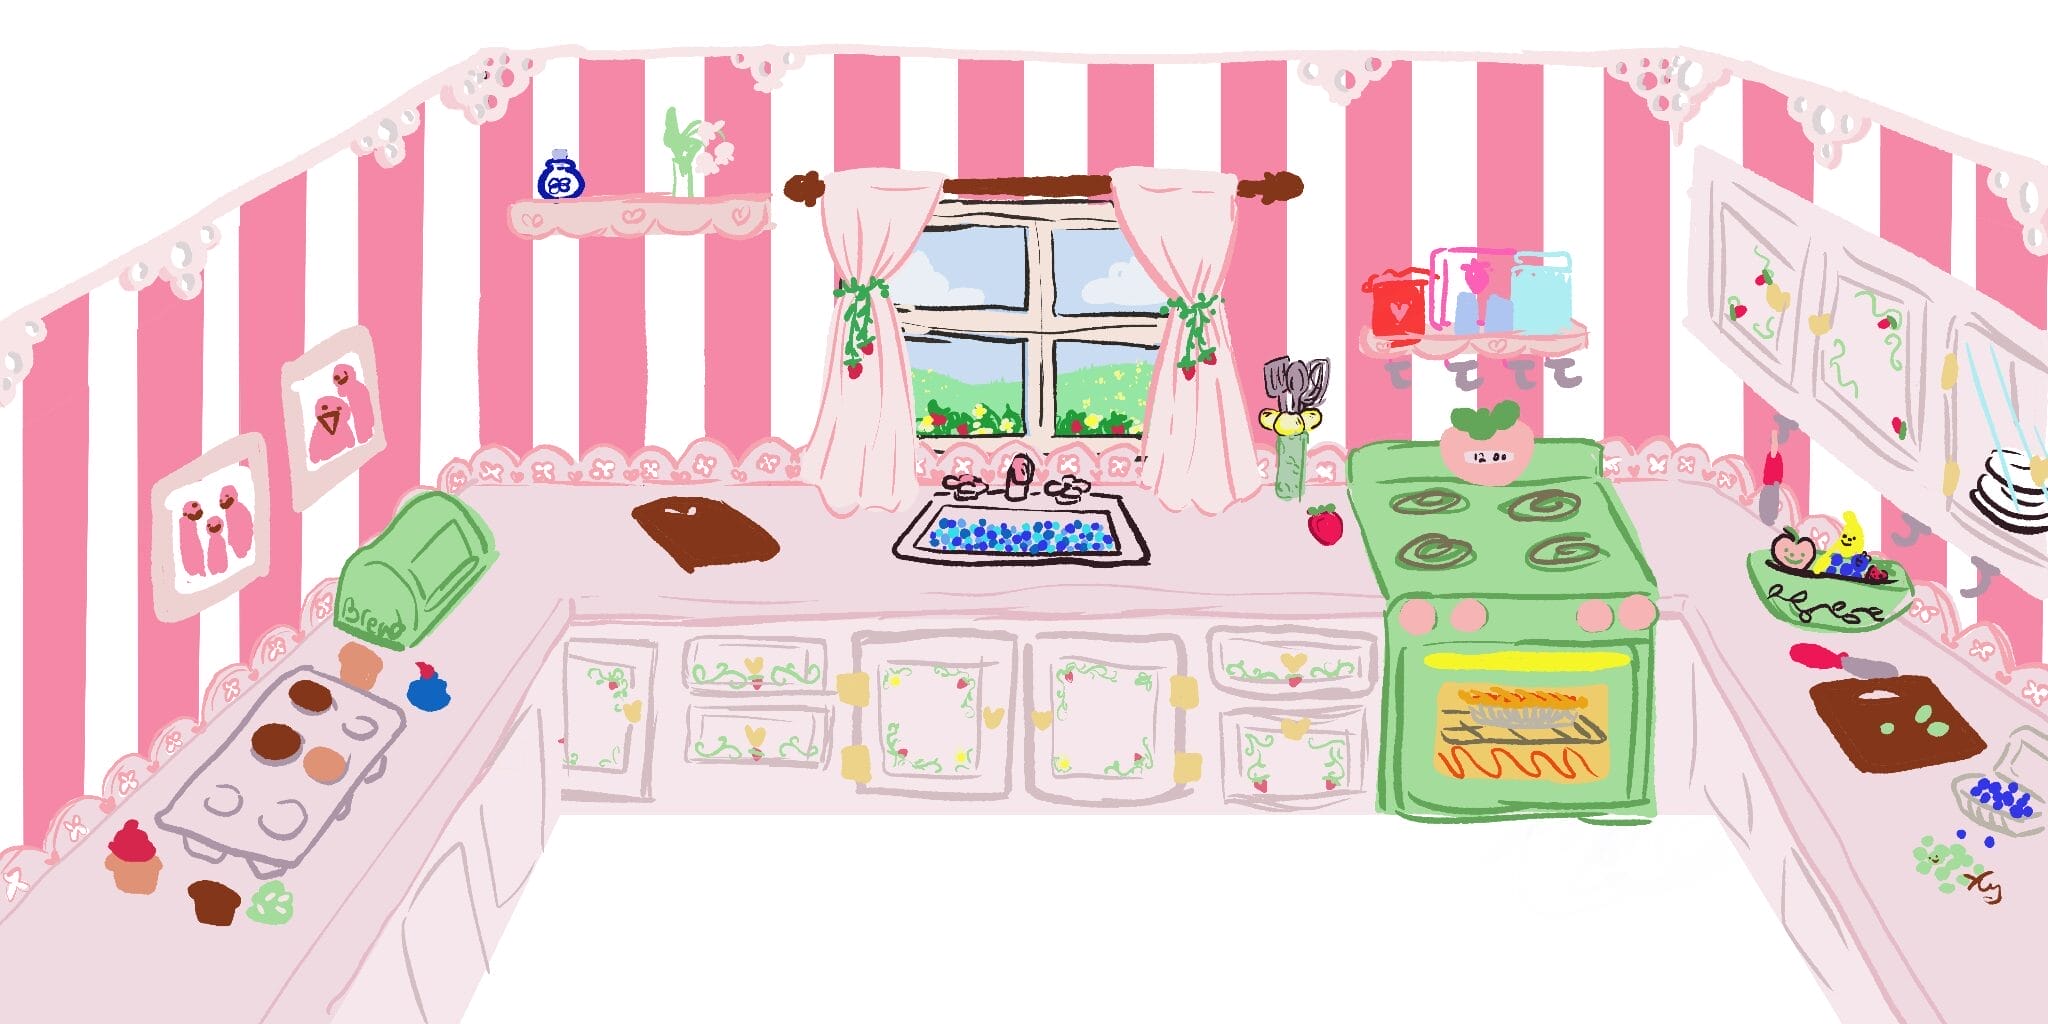 A playful illustration of a kitchen with pink and white striped walls.